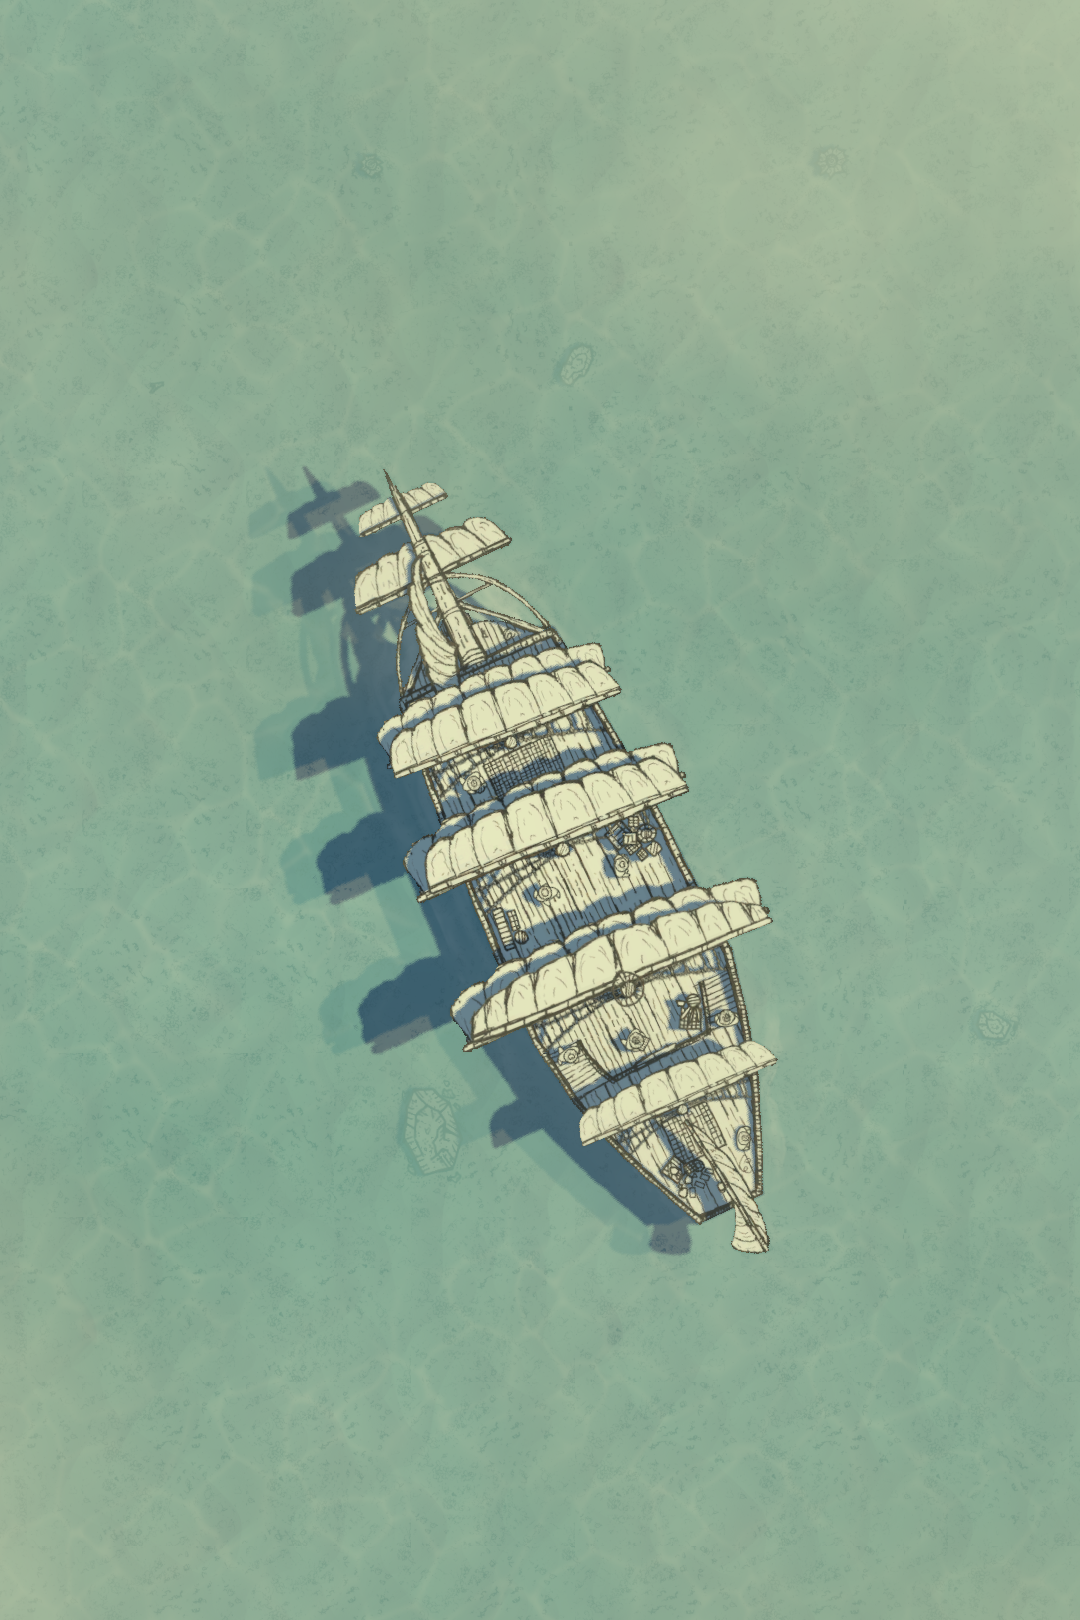 I had a form of enjoyable (and work) developing this sailing ship.